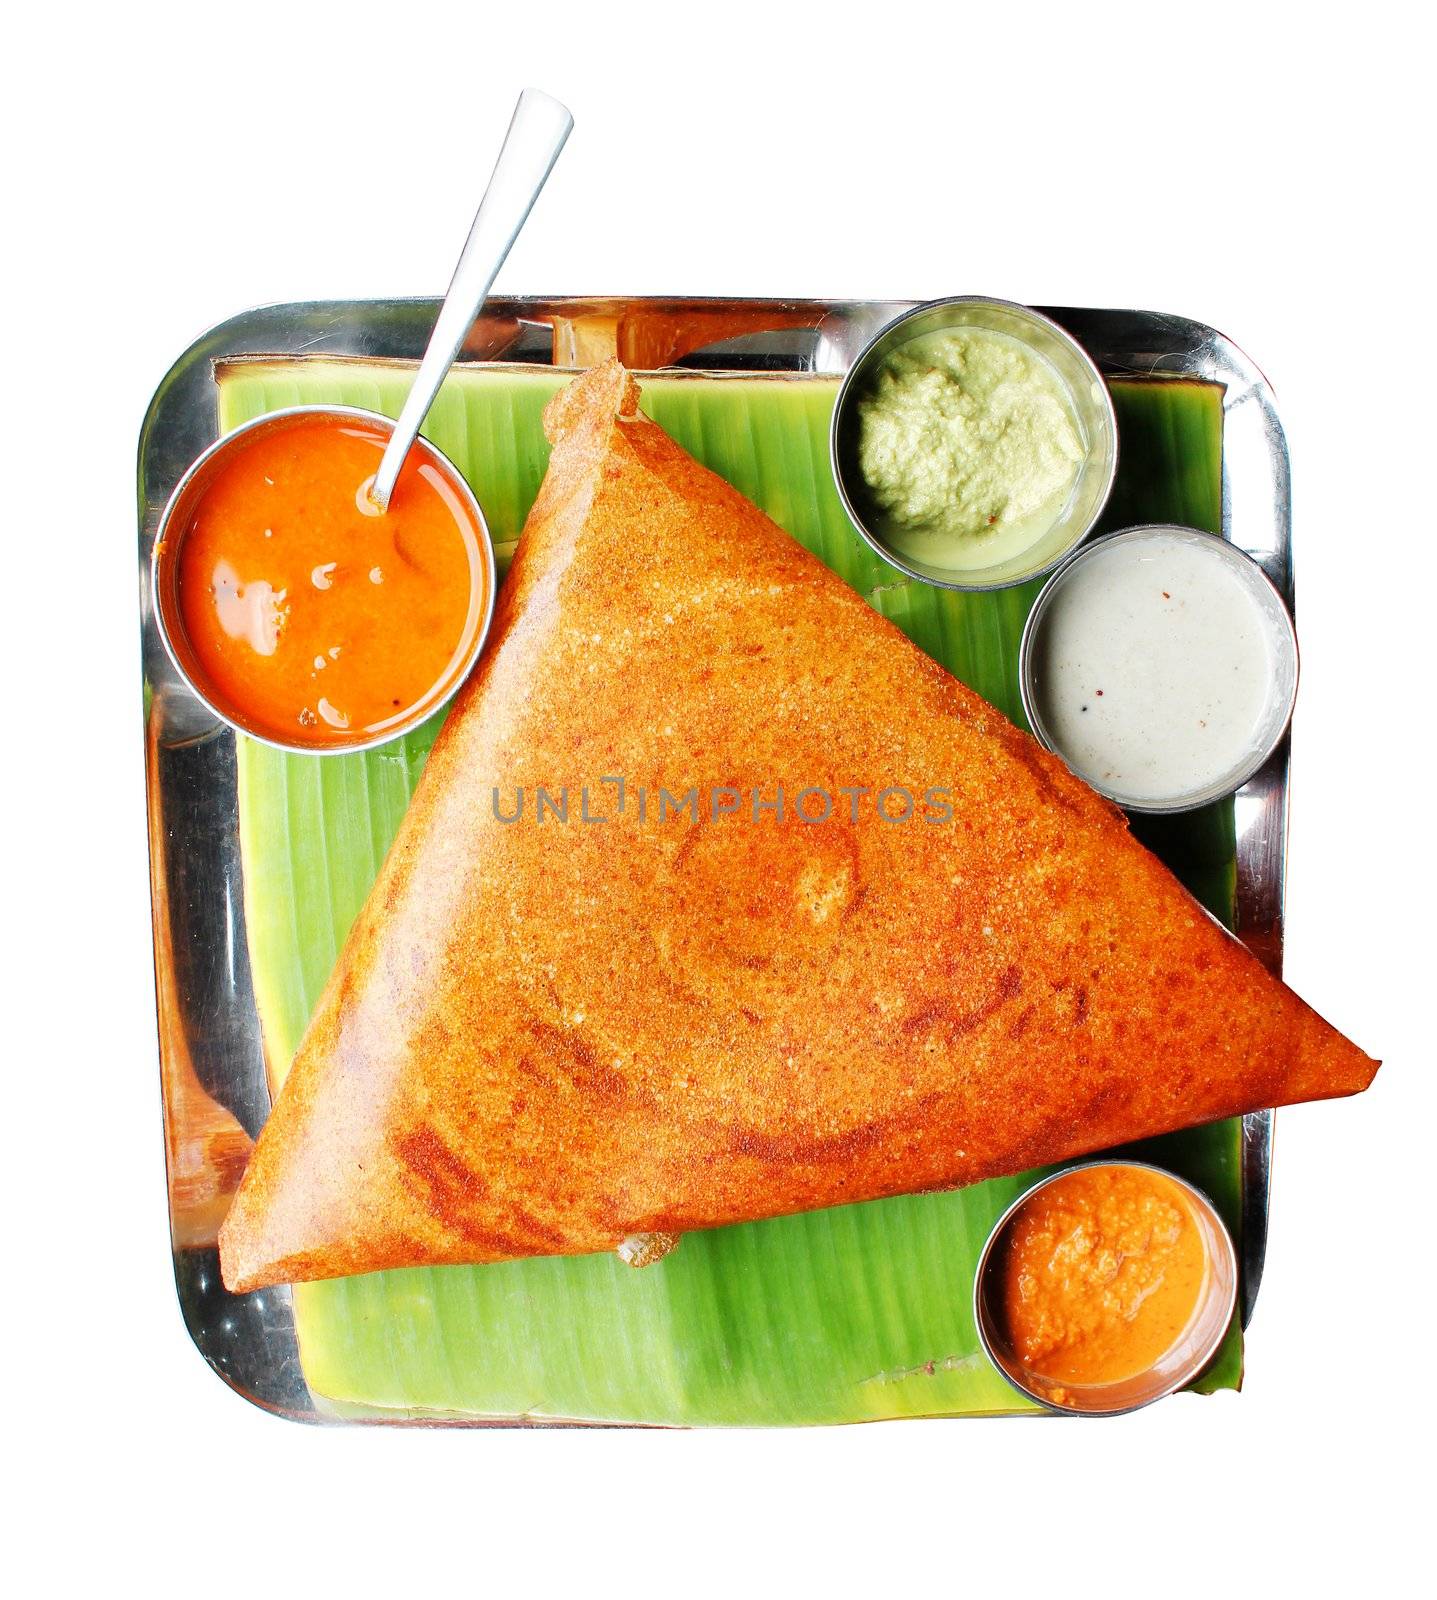 South indian breakfast dosa in golden brown color  by mnsanthoshkumar